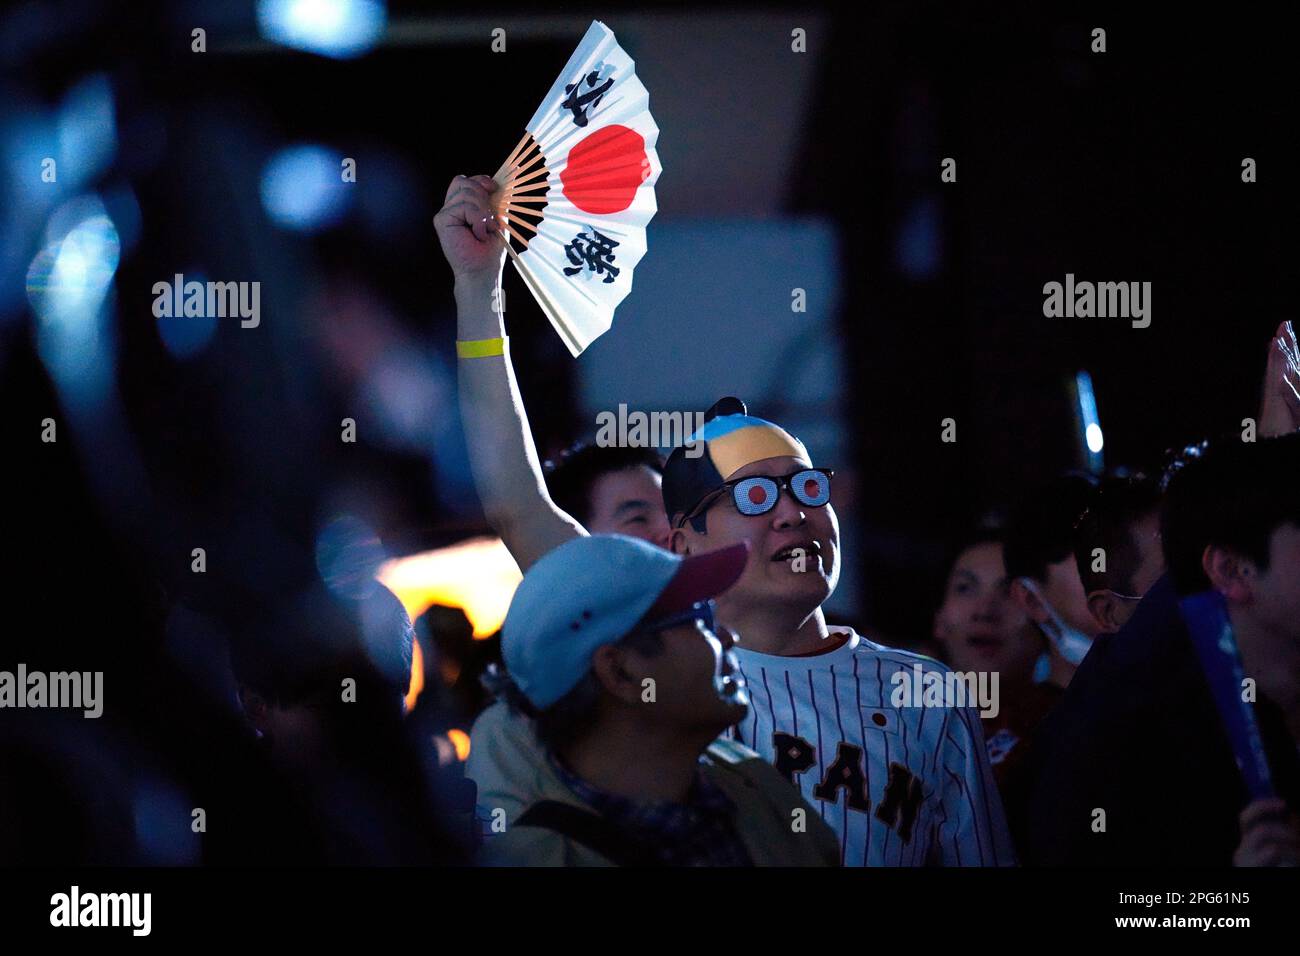 Japan fans react after Japans Masataka Yoshida hit a home rum in the 7th inning as they watch on a live stream of a World Baseball Classic (WBC) semifinal between Japan and